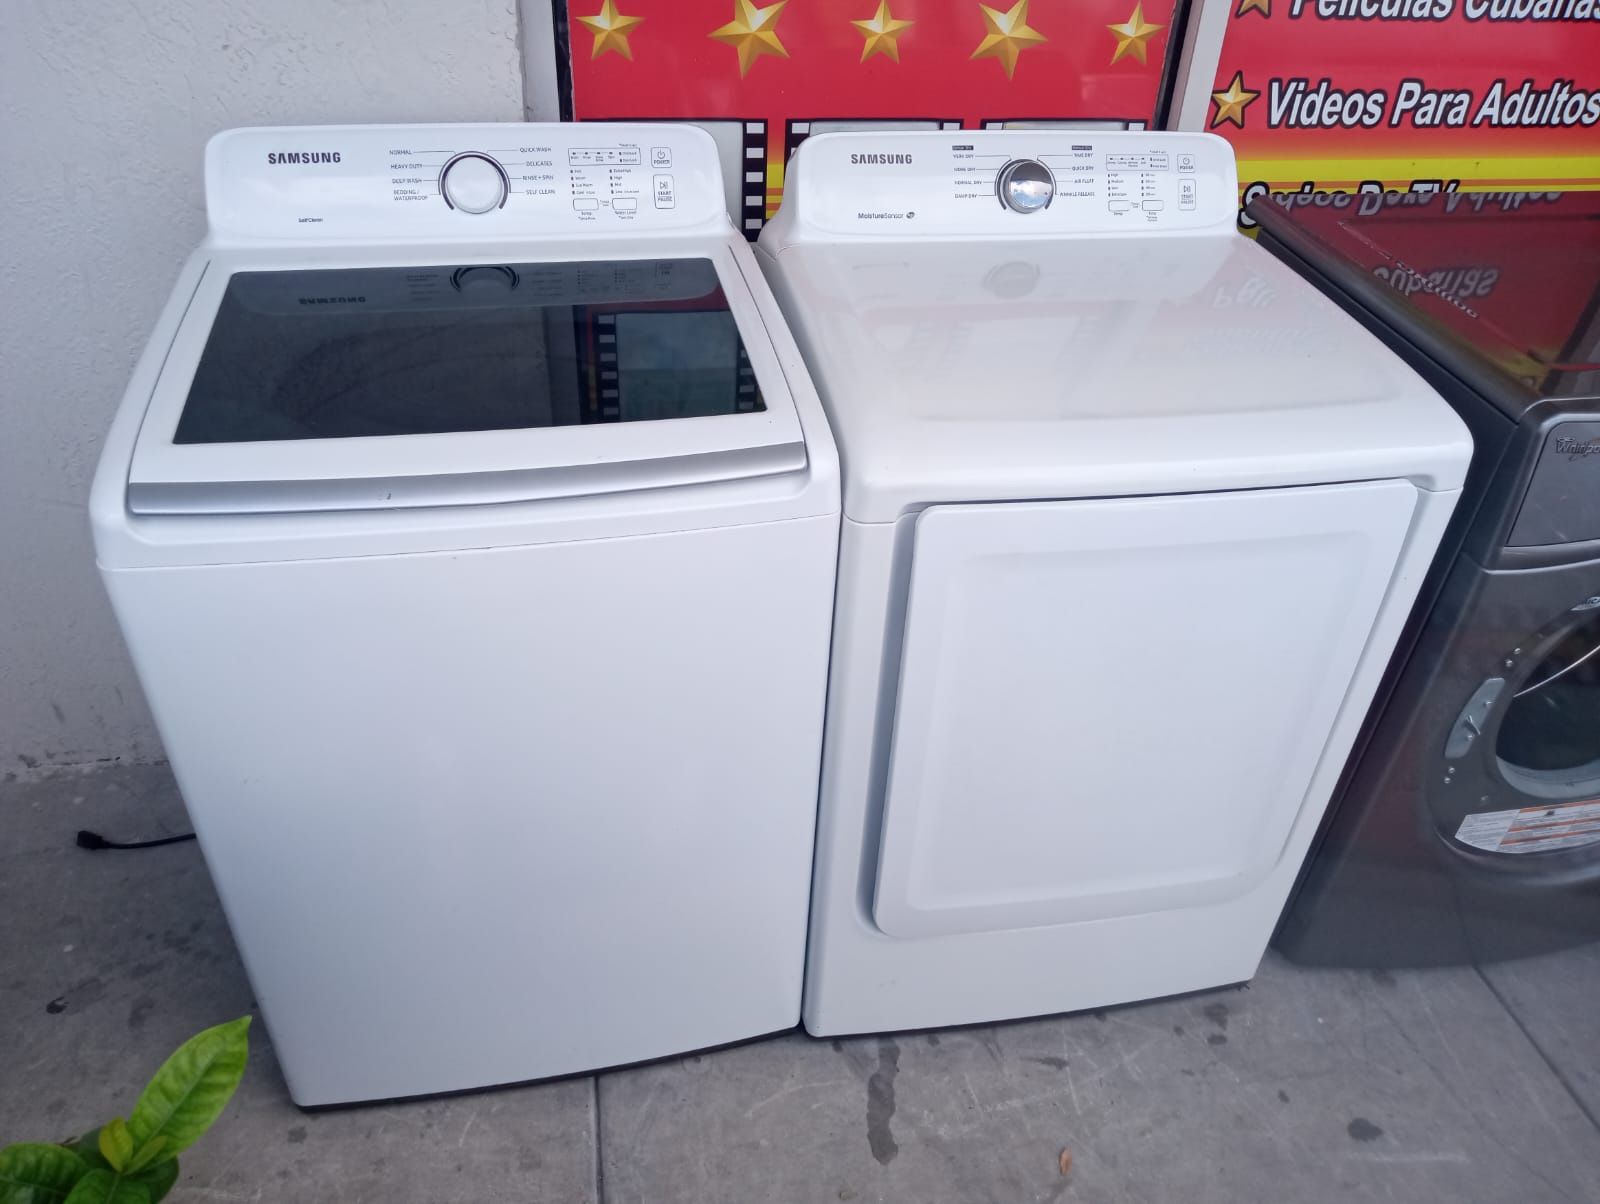 Washer And Dryer Like New With Warranty Perfect Condition Like New 